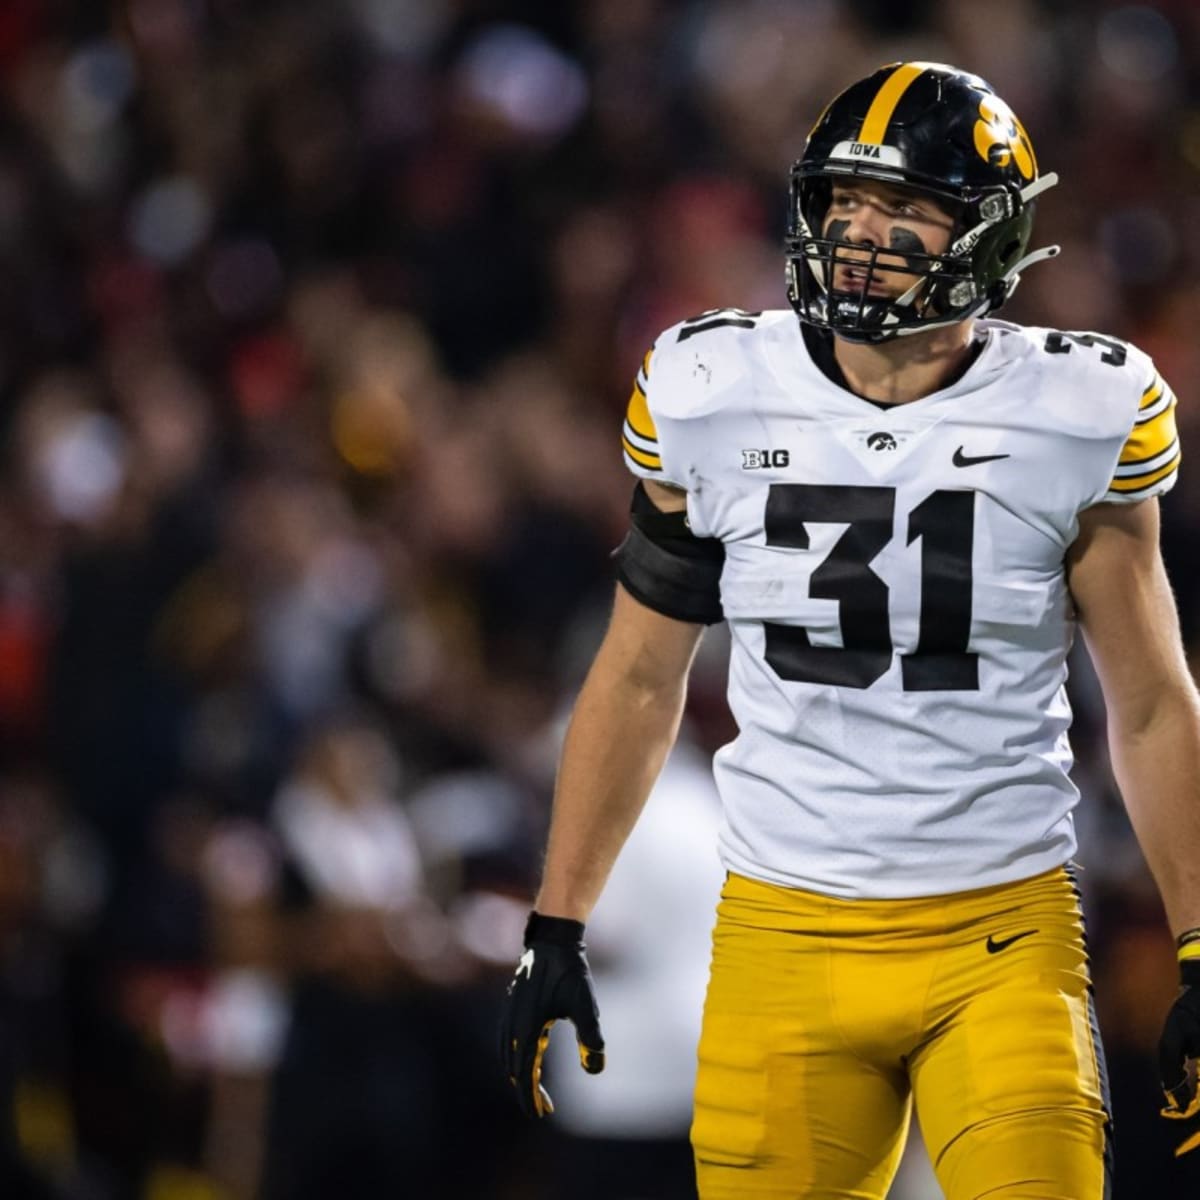 NFL Scouting Combine: Jack Campbell wows among 2023 NFL Draft LBs